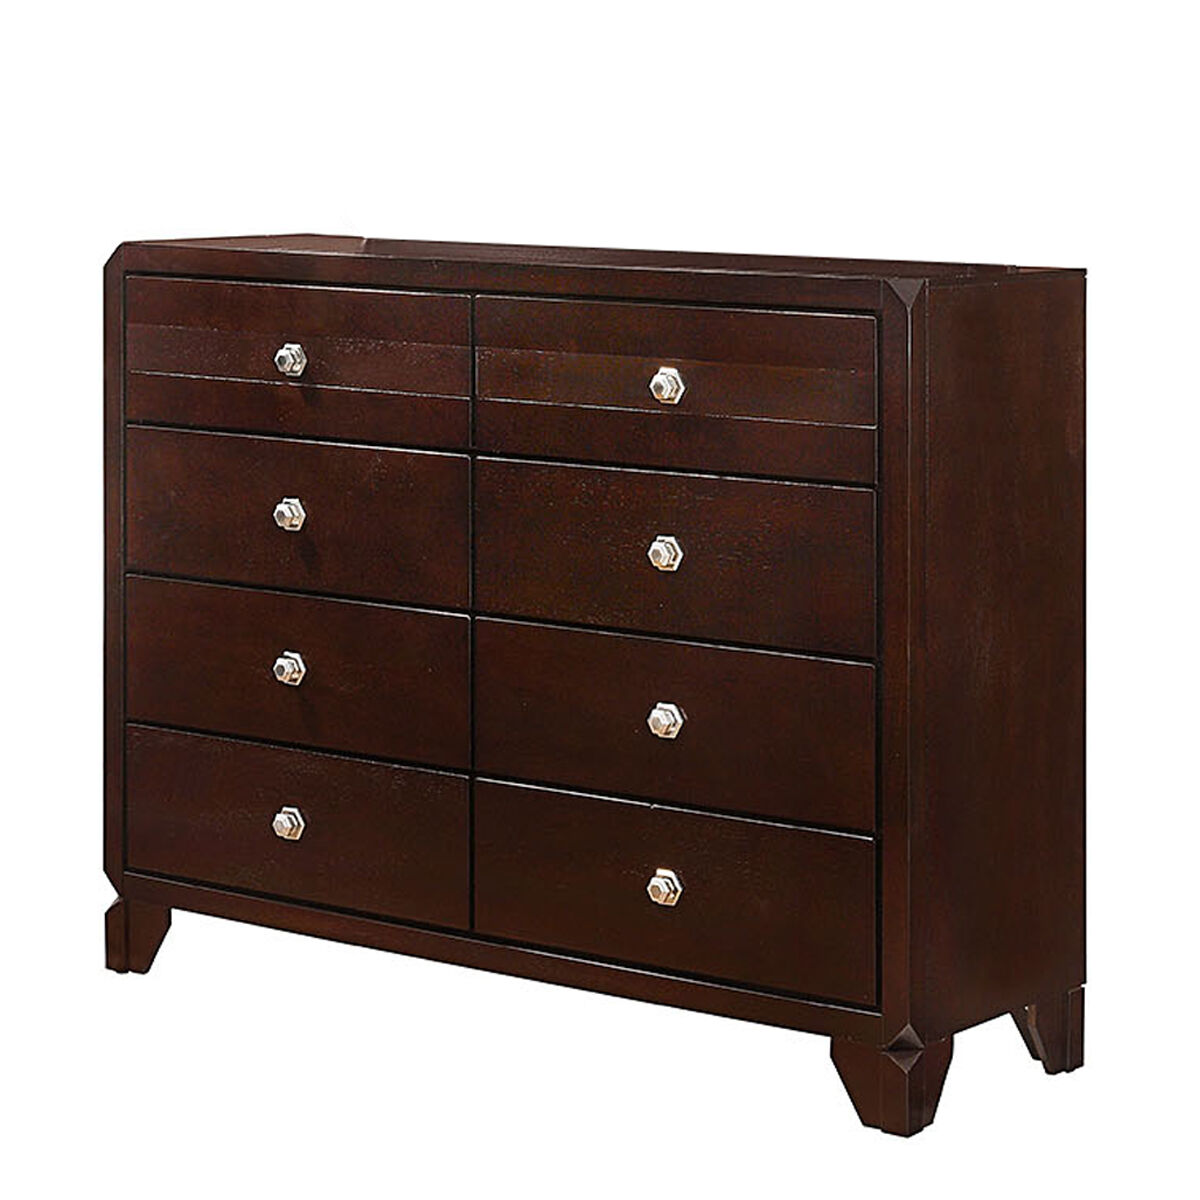 8 Drawer Transitional Dresser with Round Knobs and Clipped Feet, Brown